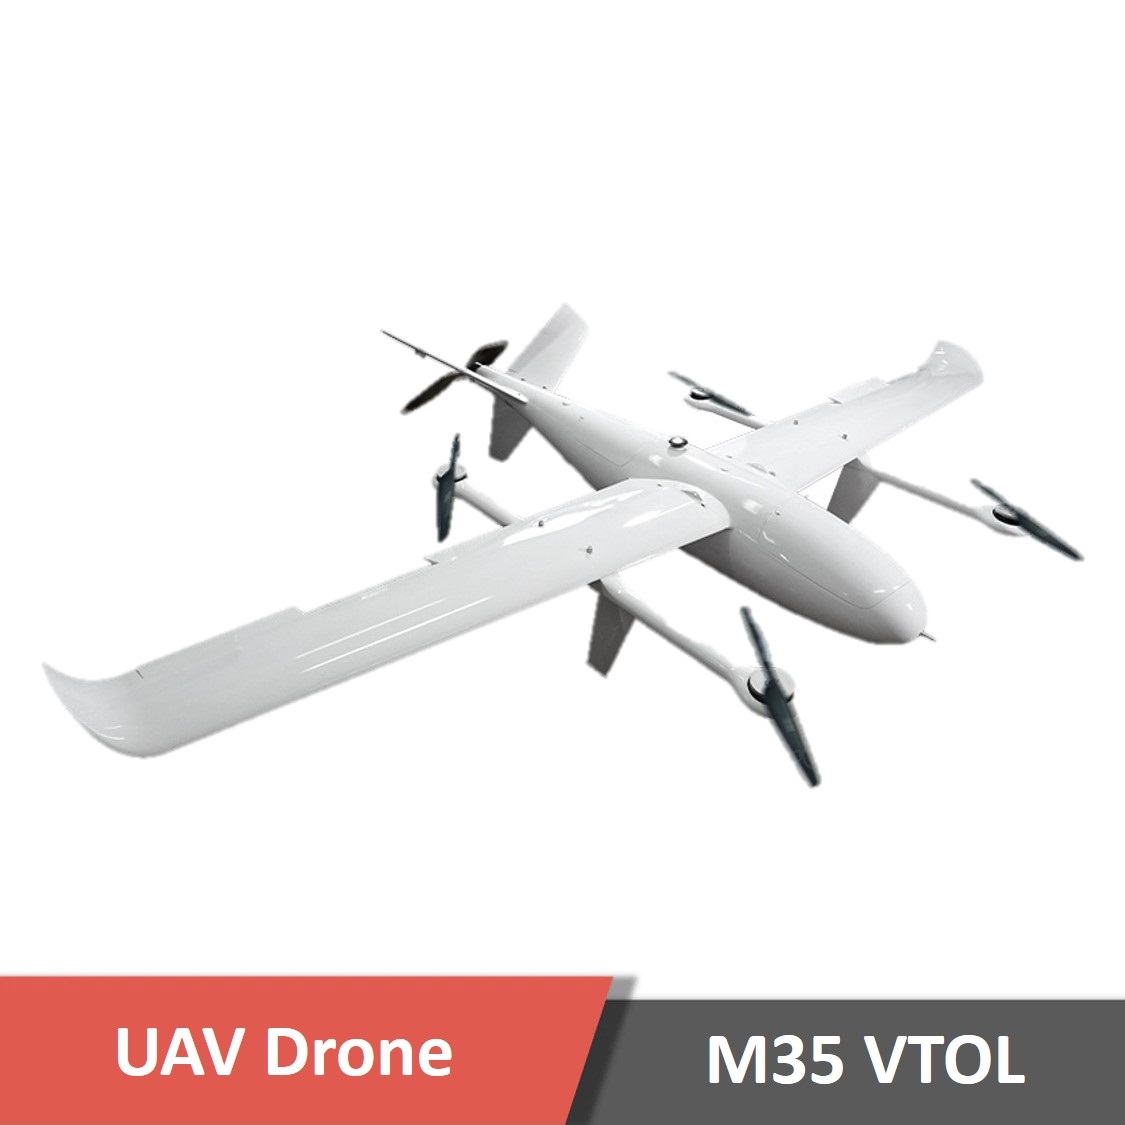 M35 1 - vtol drone,long endurance,fixedwing uav,t-tail,t-tail drone,cargo drone,wind resistance,detachable load,detachable payload,mapping drone,surveying drone,fixed-wing uav - motionew - 3